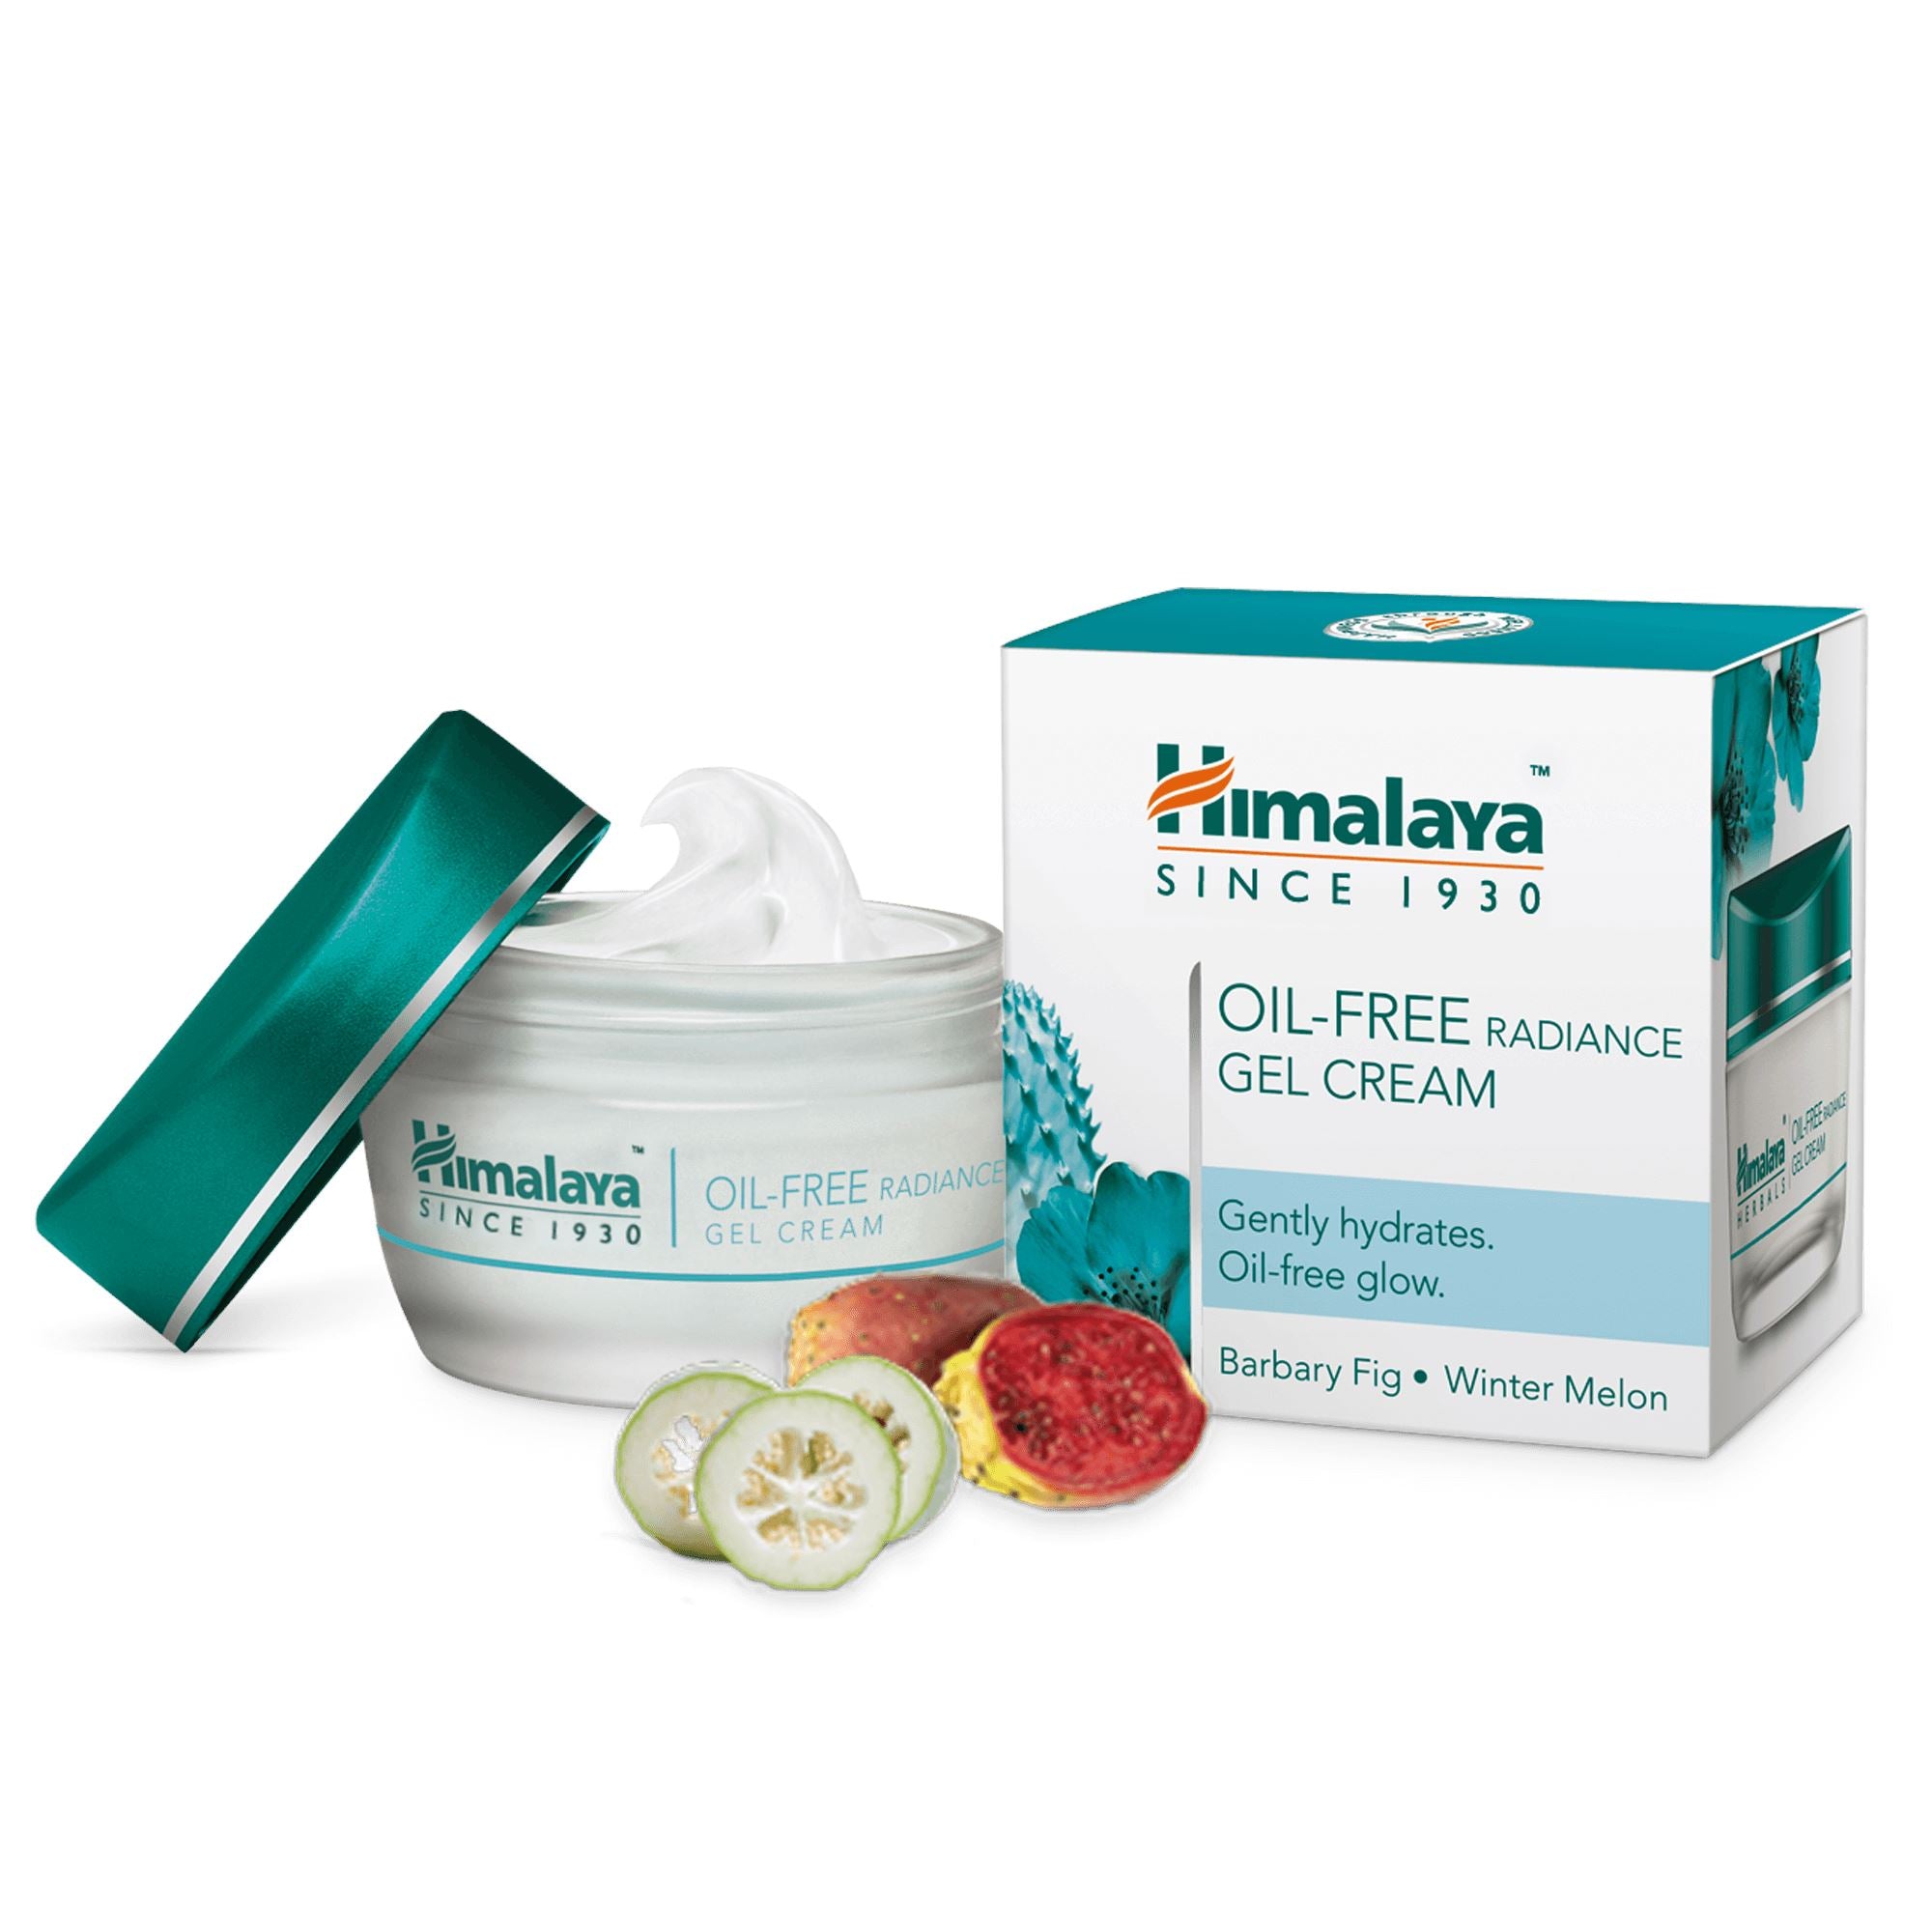 Himalaya OIL-FREE RADIANCE GEL CREAM - Gently hydrates for an oil-free glow